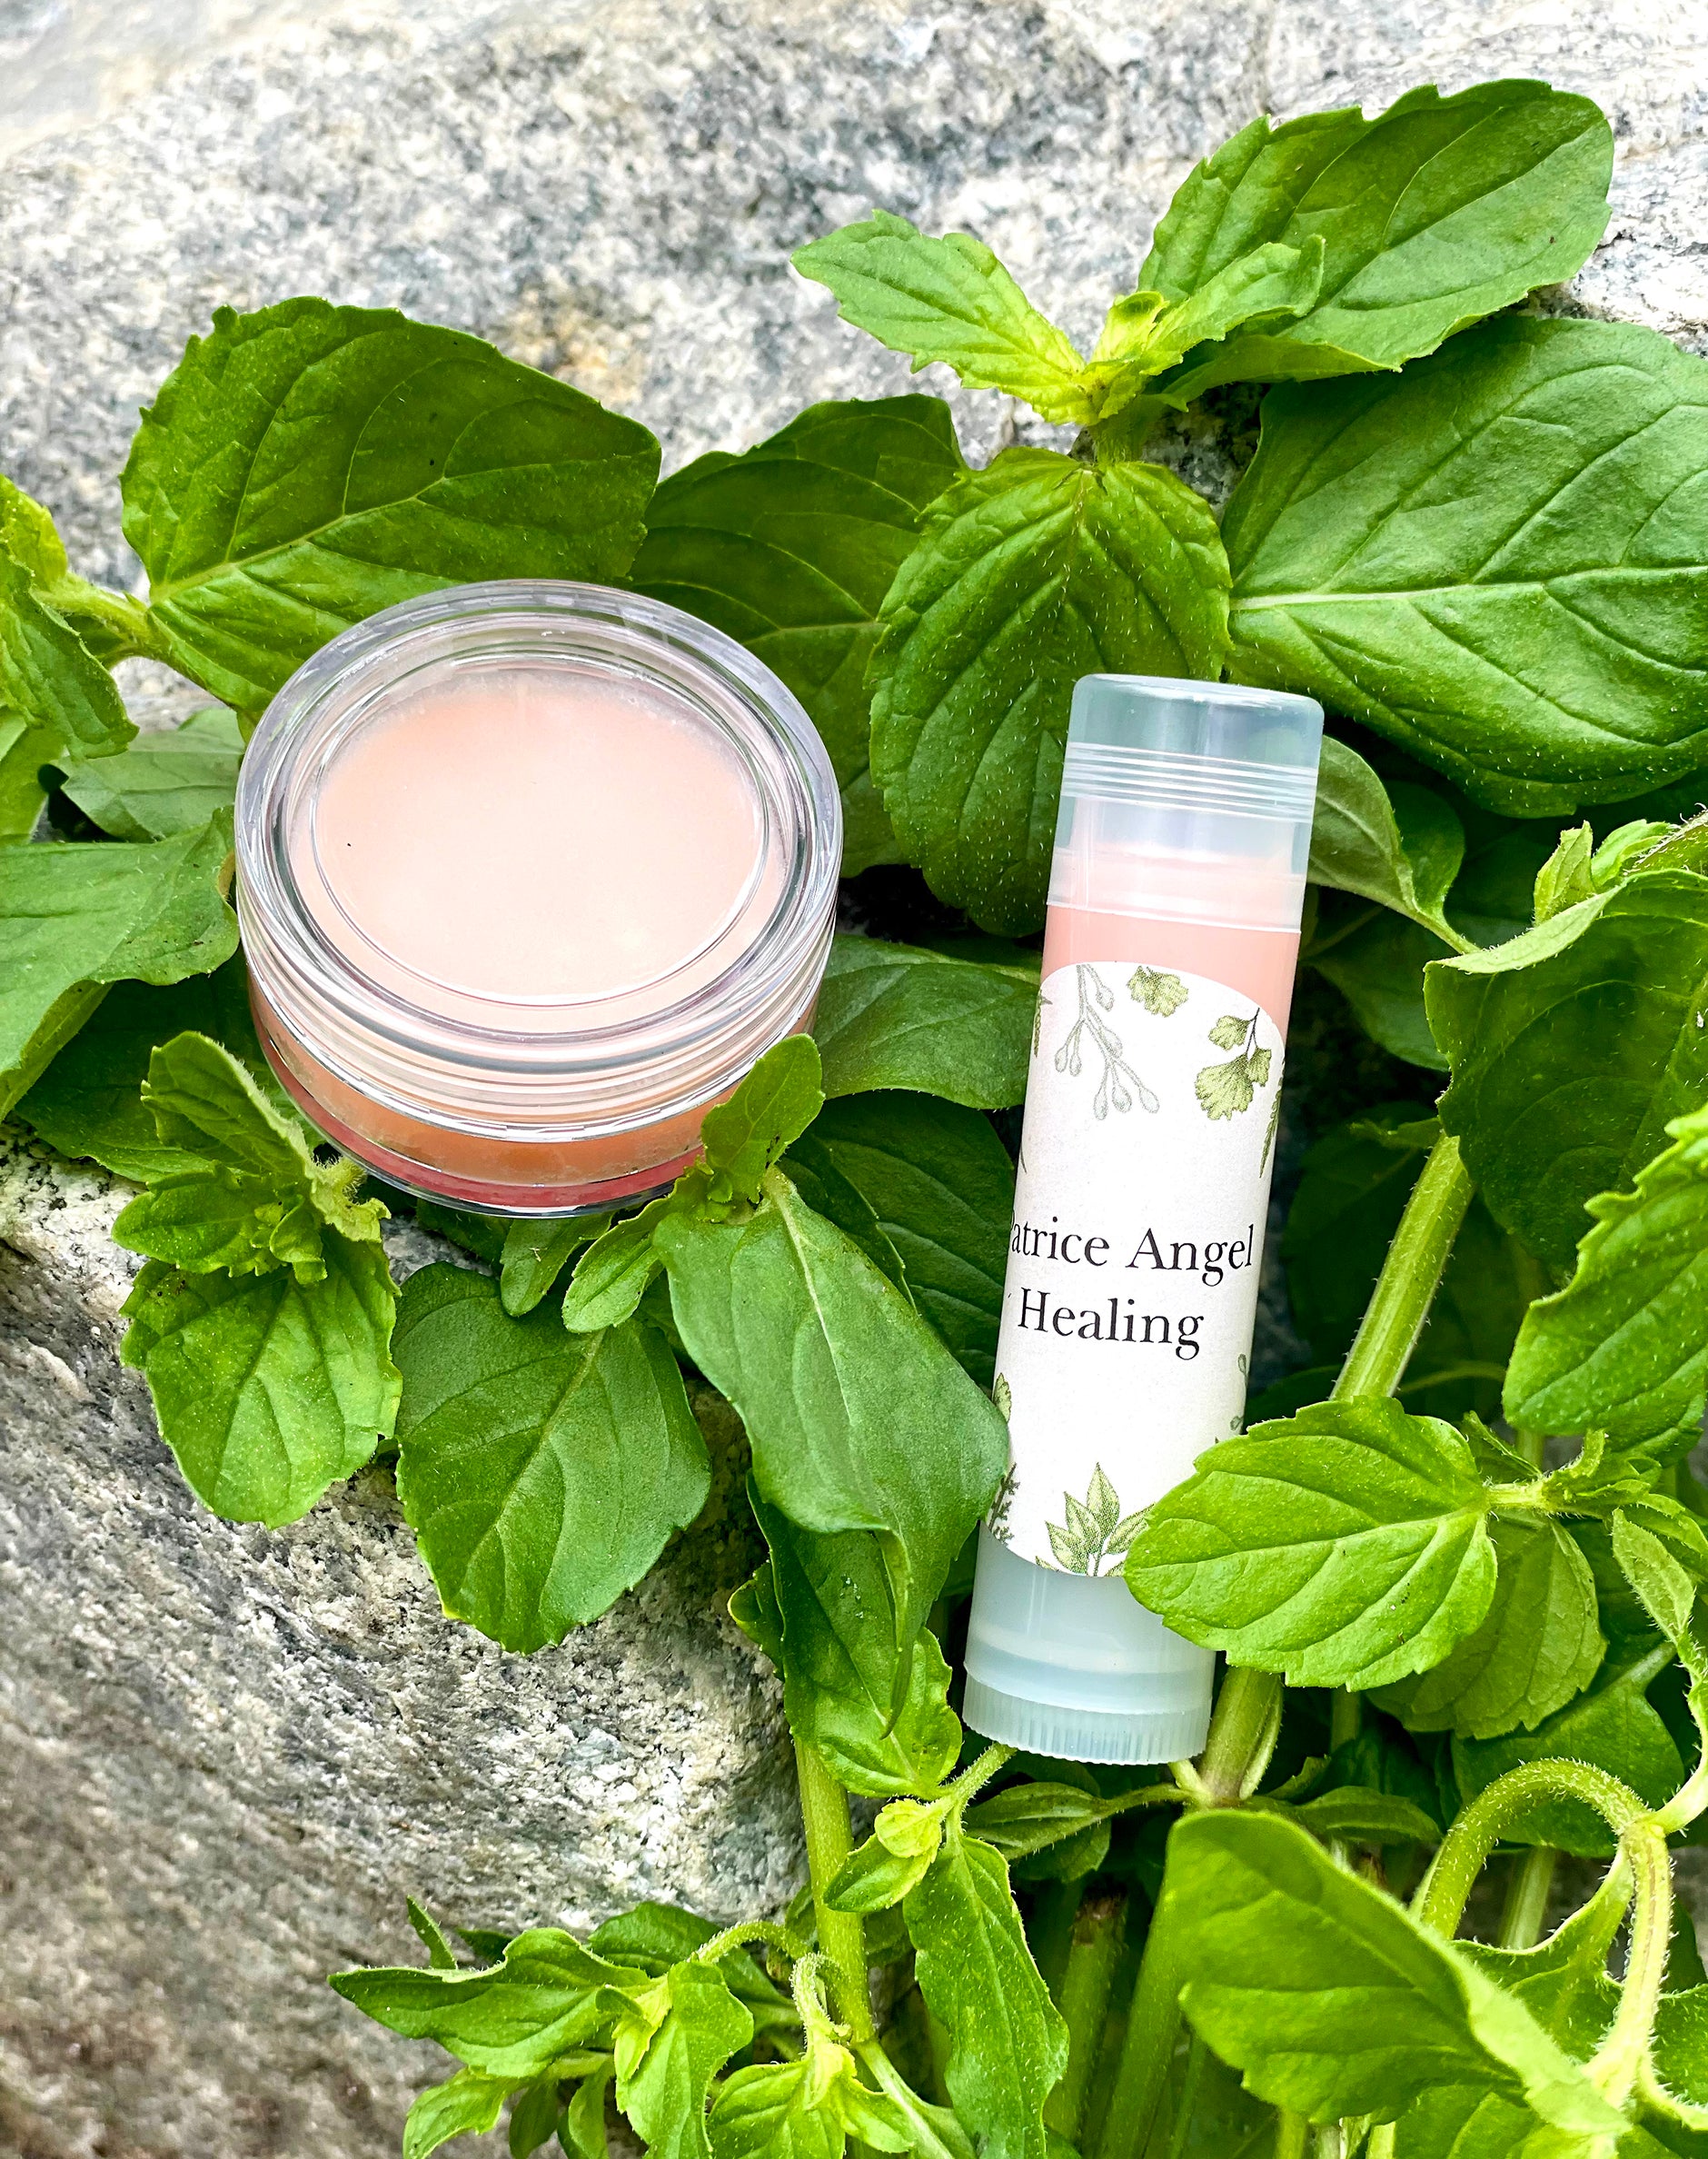 Creamy, long lasting, healing hydration lip balms in refreshing vanilla/mint.  Nourishing moisture with natural essential peppermint oil, grape seed oil, beeswax and Shea butter in BPA free, clear round jars and tubes. Made in California To preserve the natural oils, keep in a cool dry place.